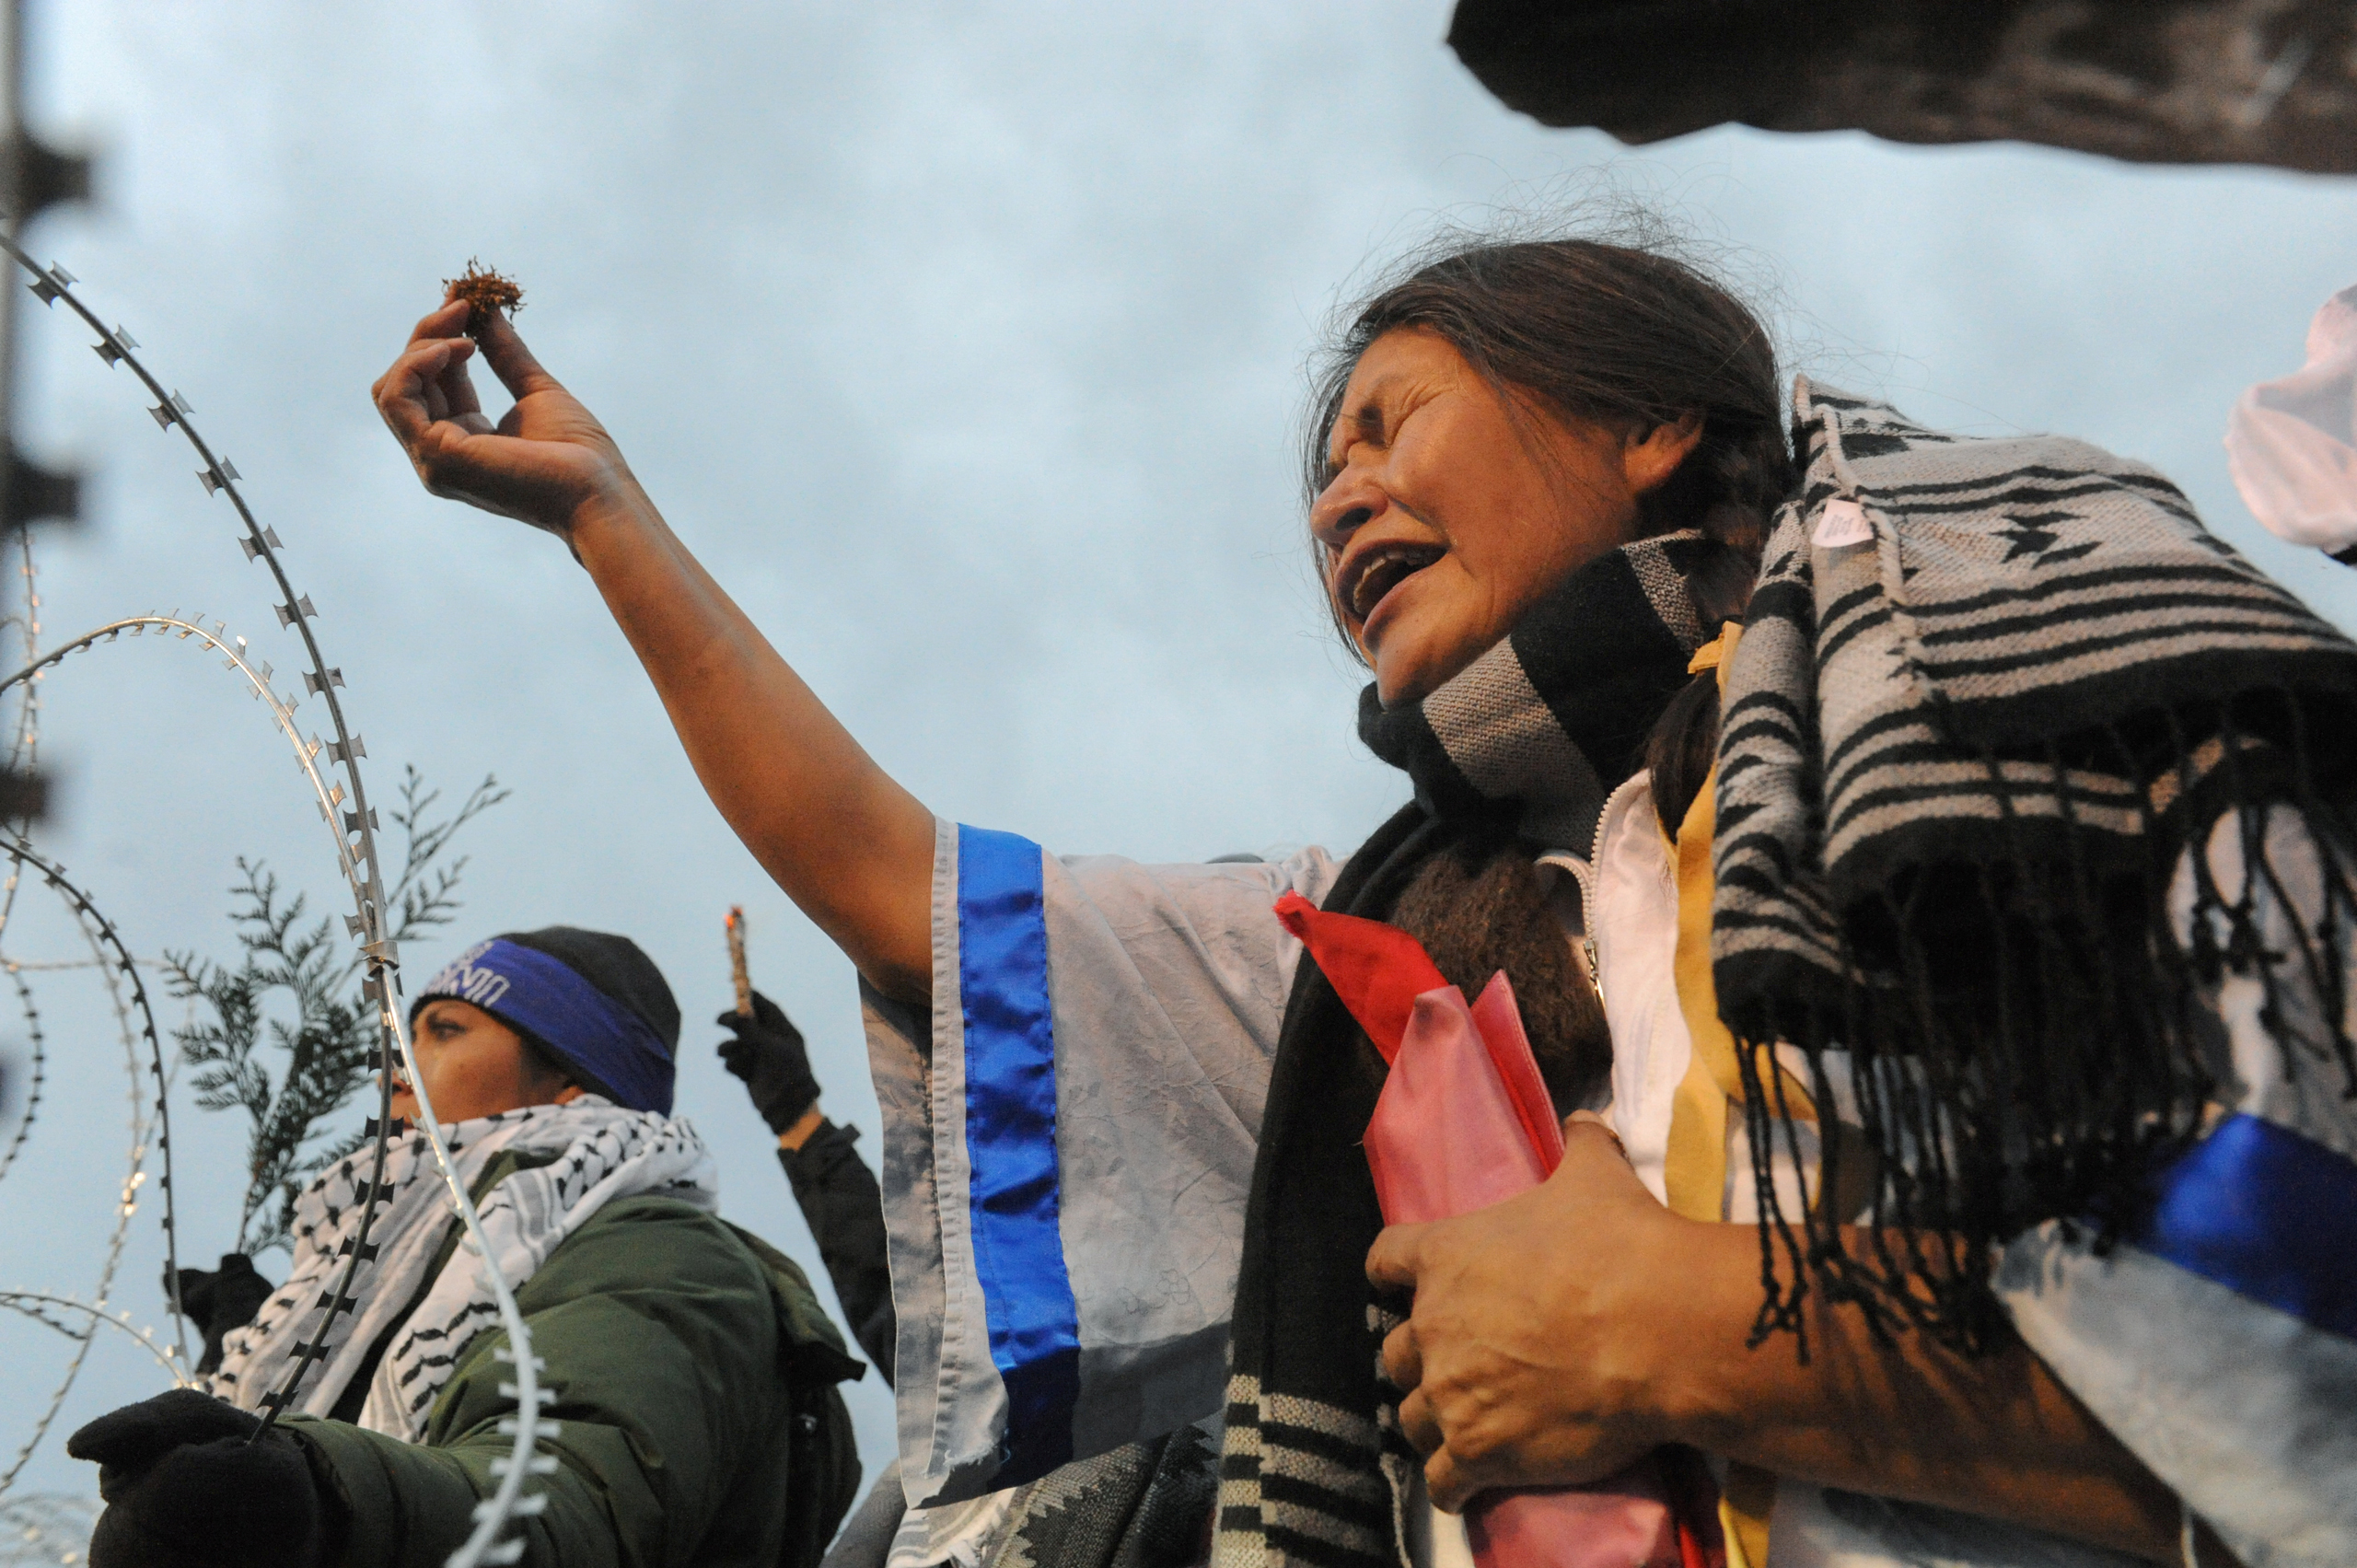 Cheryl Angel offers ceremonial tobacco on Backwater Bridge during a protest against plans to pass the Dakota Access pipeline near the Standing Rock Indian Reservation, near Cannon Ball, North Dakota, on Nov. 27, 2016. (Stephanie Keith—Reuters)